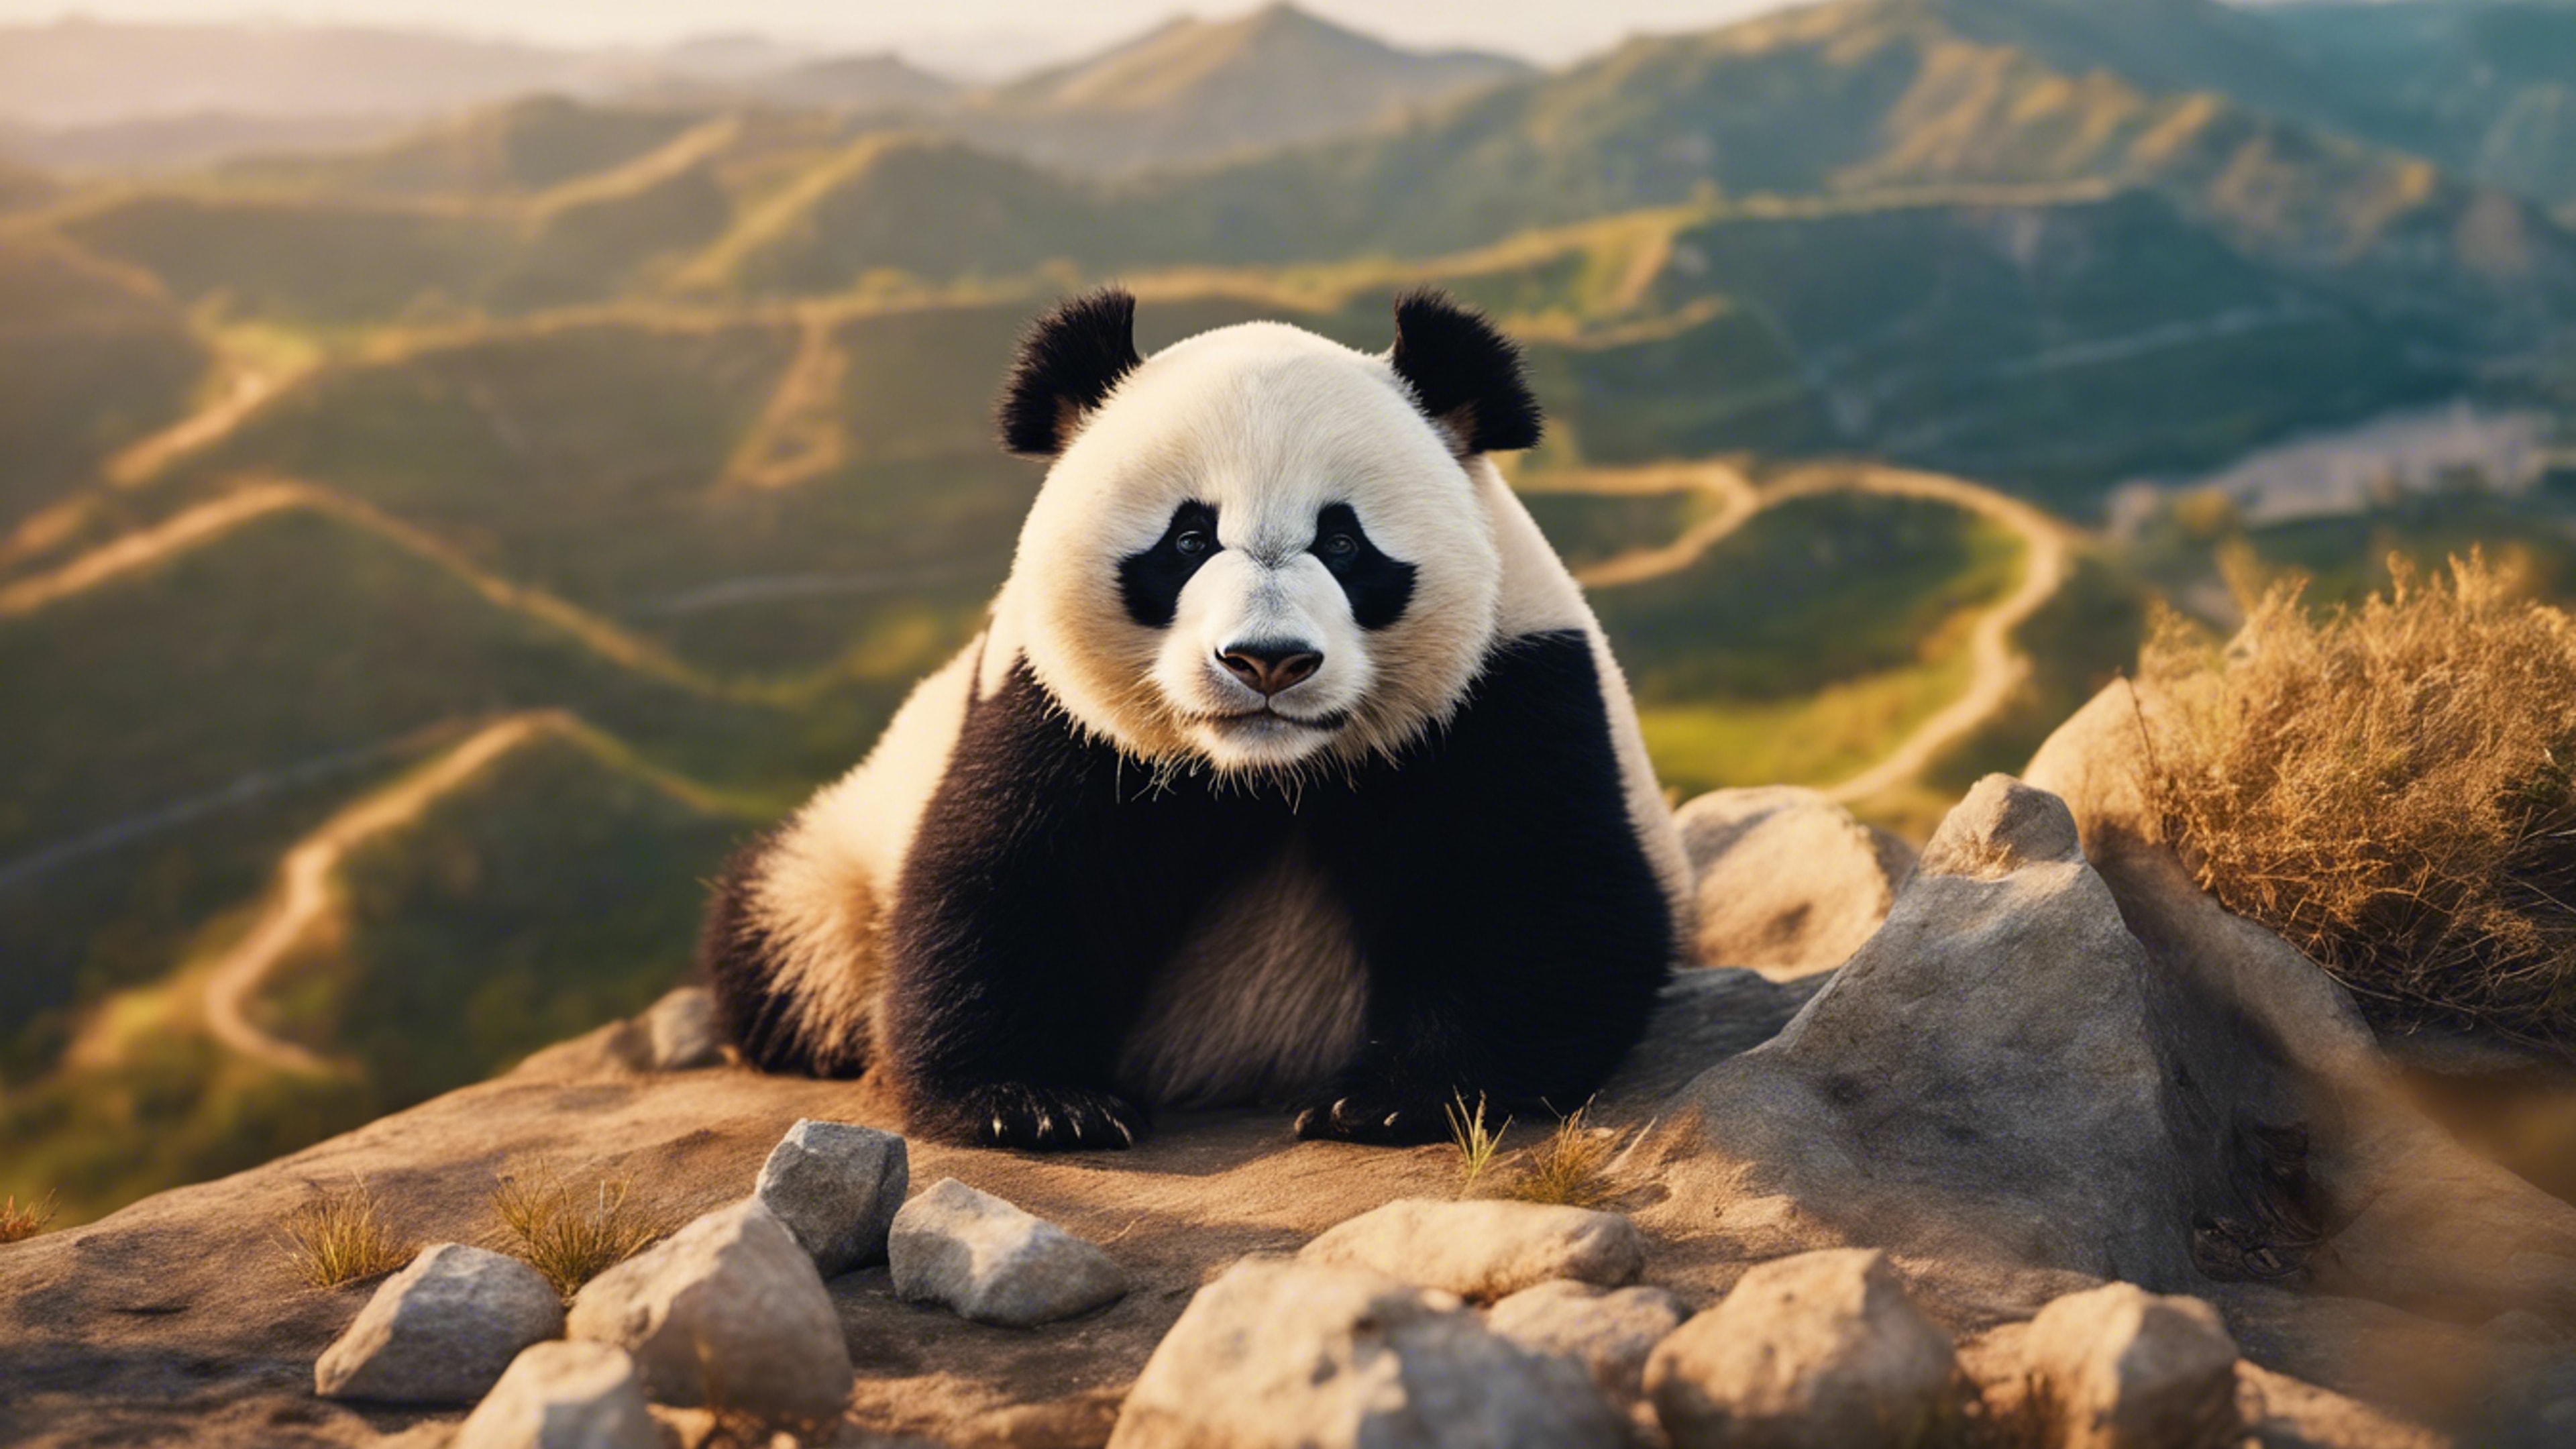 A proud panda basking in the warm sunlight, on a cliff overlooking a wide, beautiful valley. Шпалери[f1b4c4cbced14ad39a34]